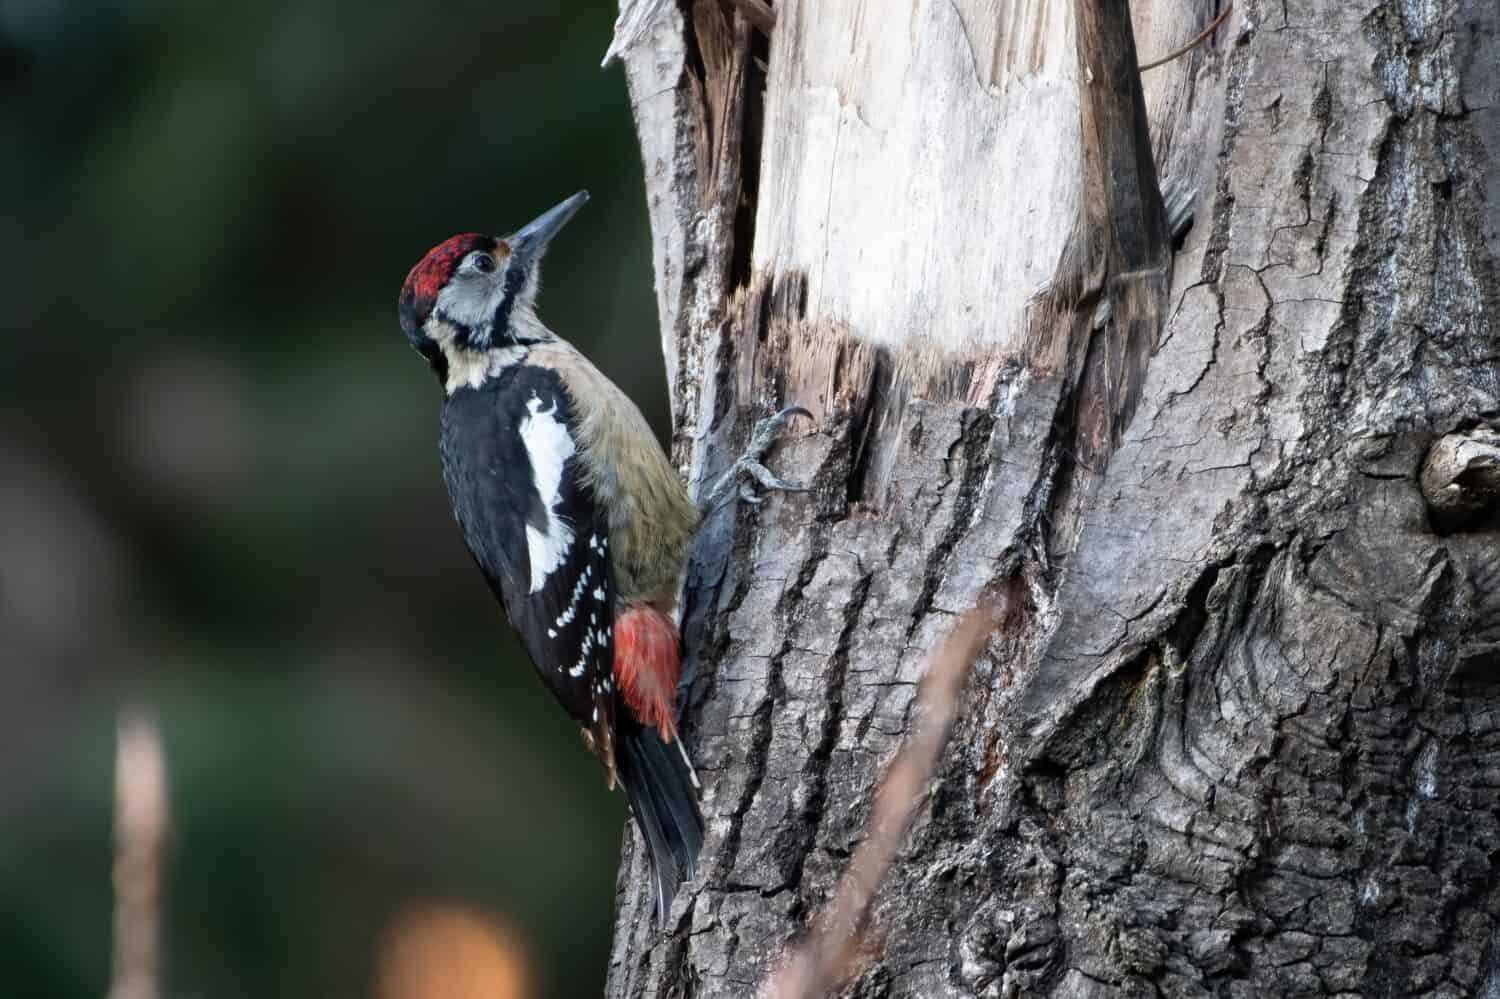 Himalayan Woodpecker photographed in Sattal, India